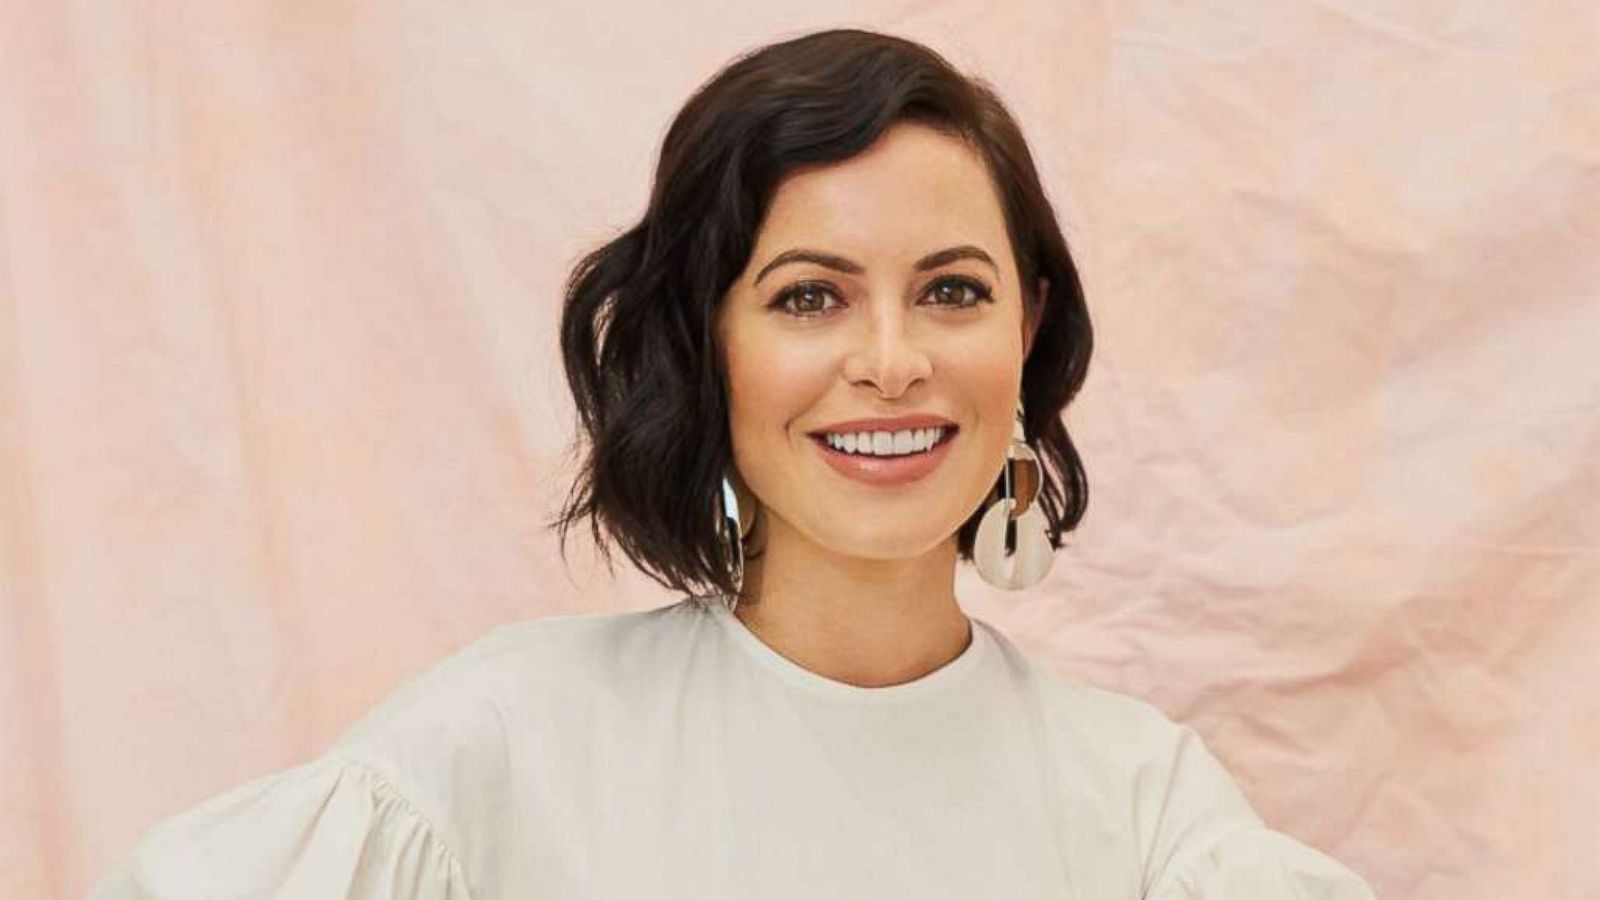 The real Girlboss: the rise and fall of Nasty Gal founder Sophia Amoruso